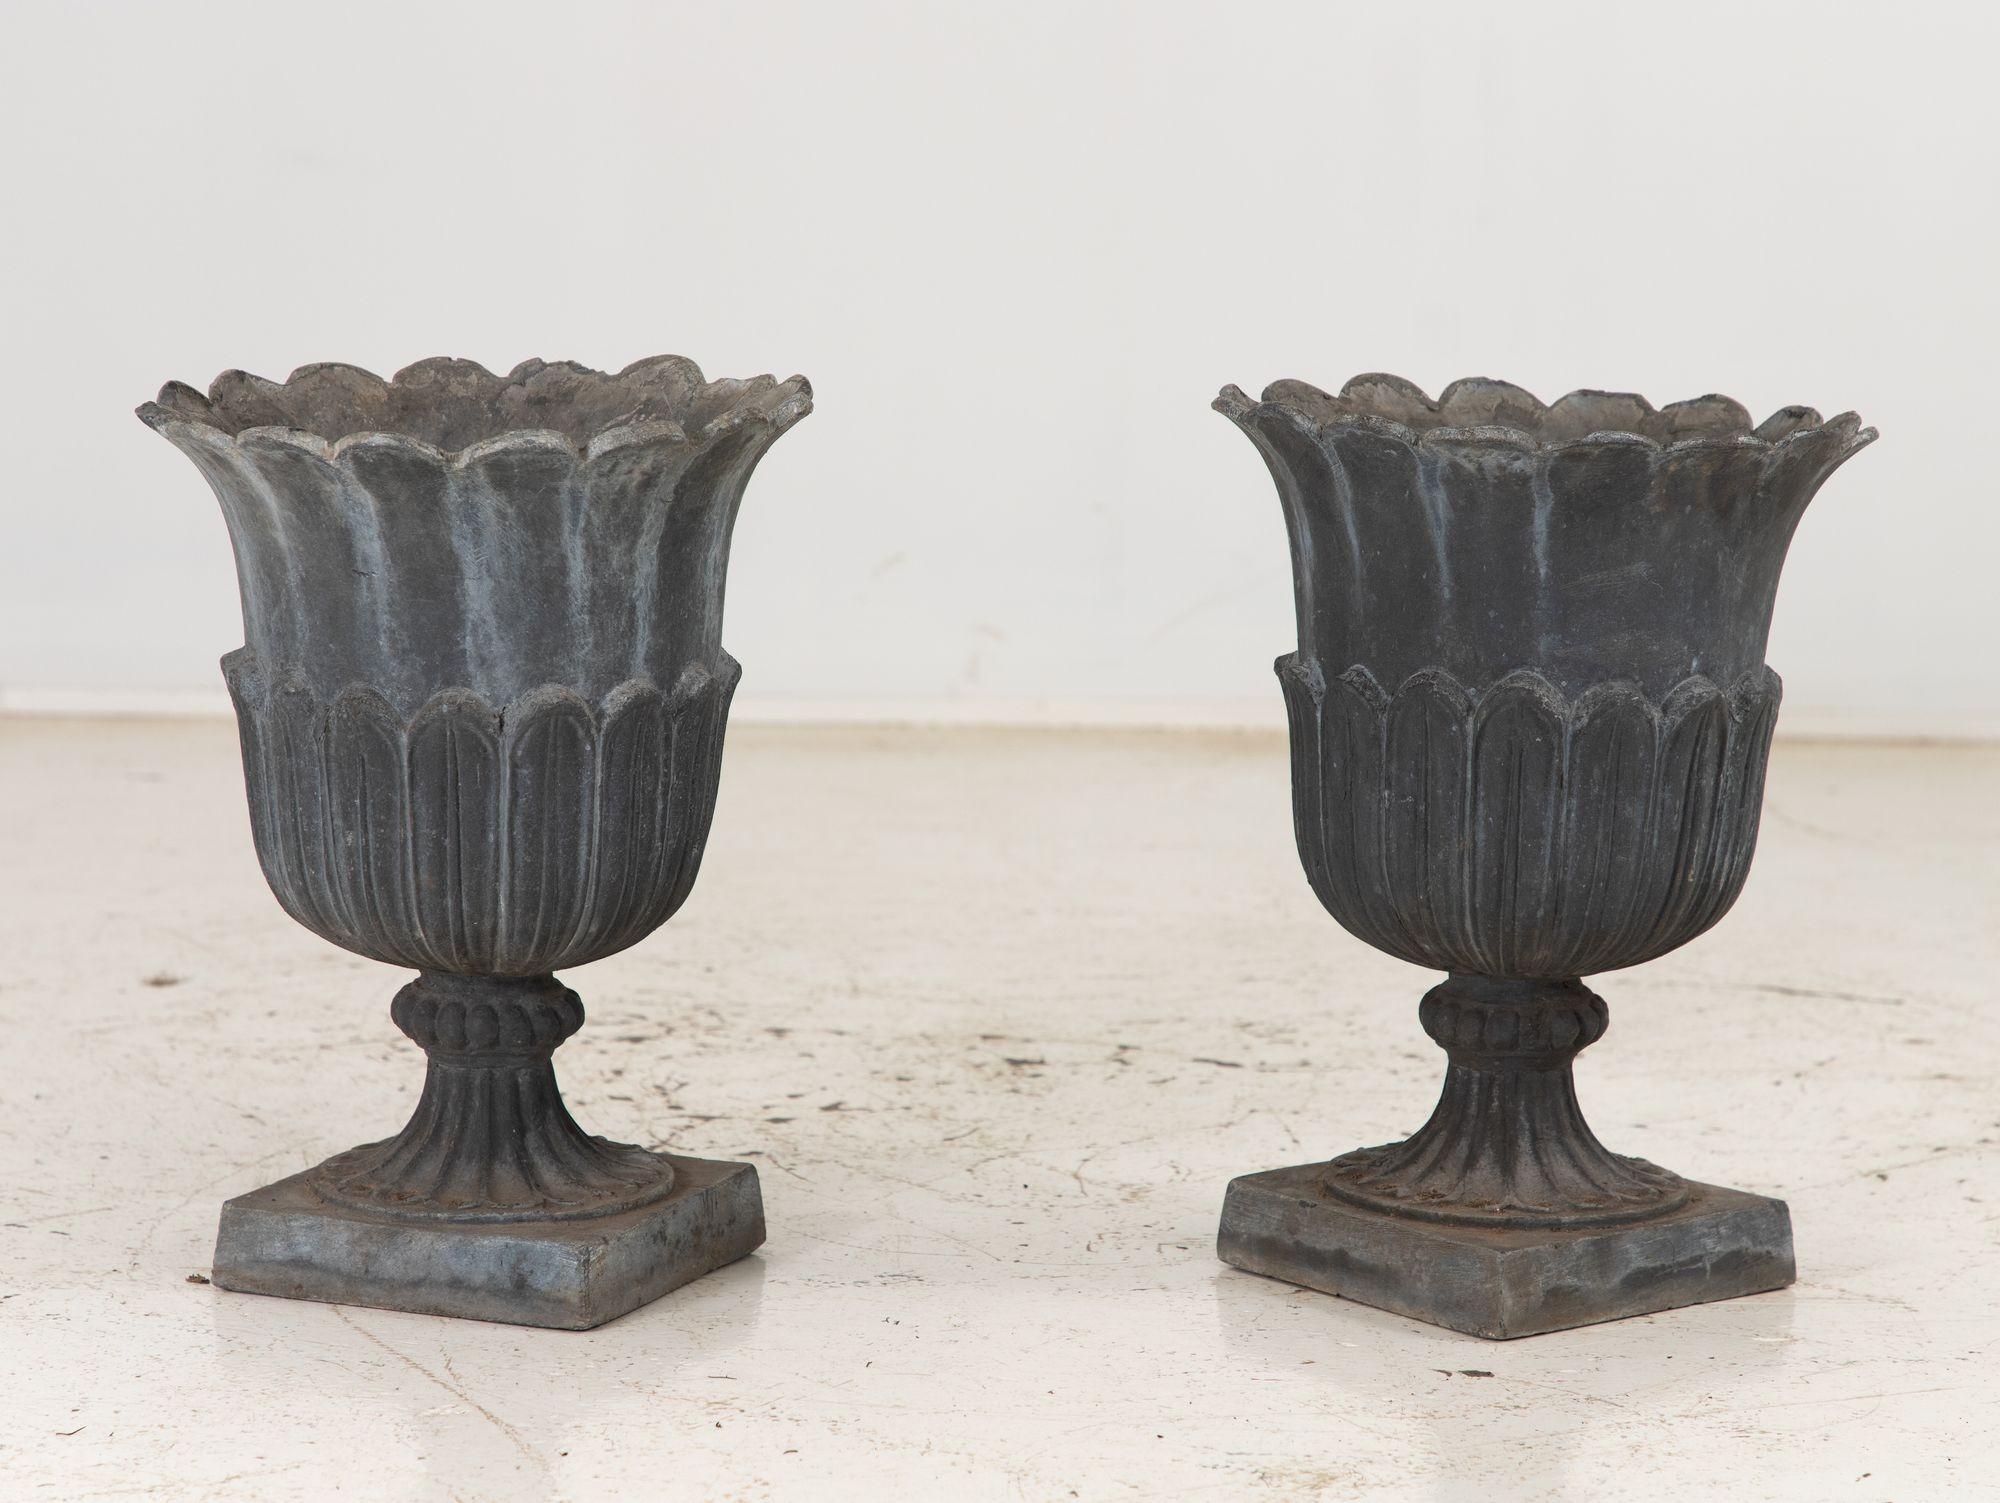 This exquisite pair of antique French tulip garden urns are a testament to timeless elegance. Crafted with meticulous care, each urn is made from durable and sturdy lead, ensuring longevity and durability. The intricate detailing of the tulip petals